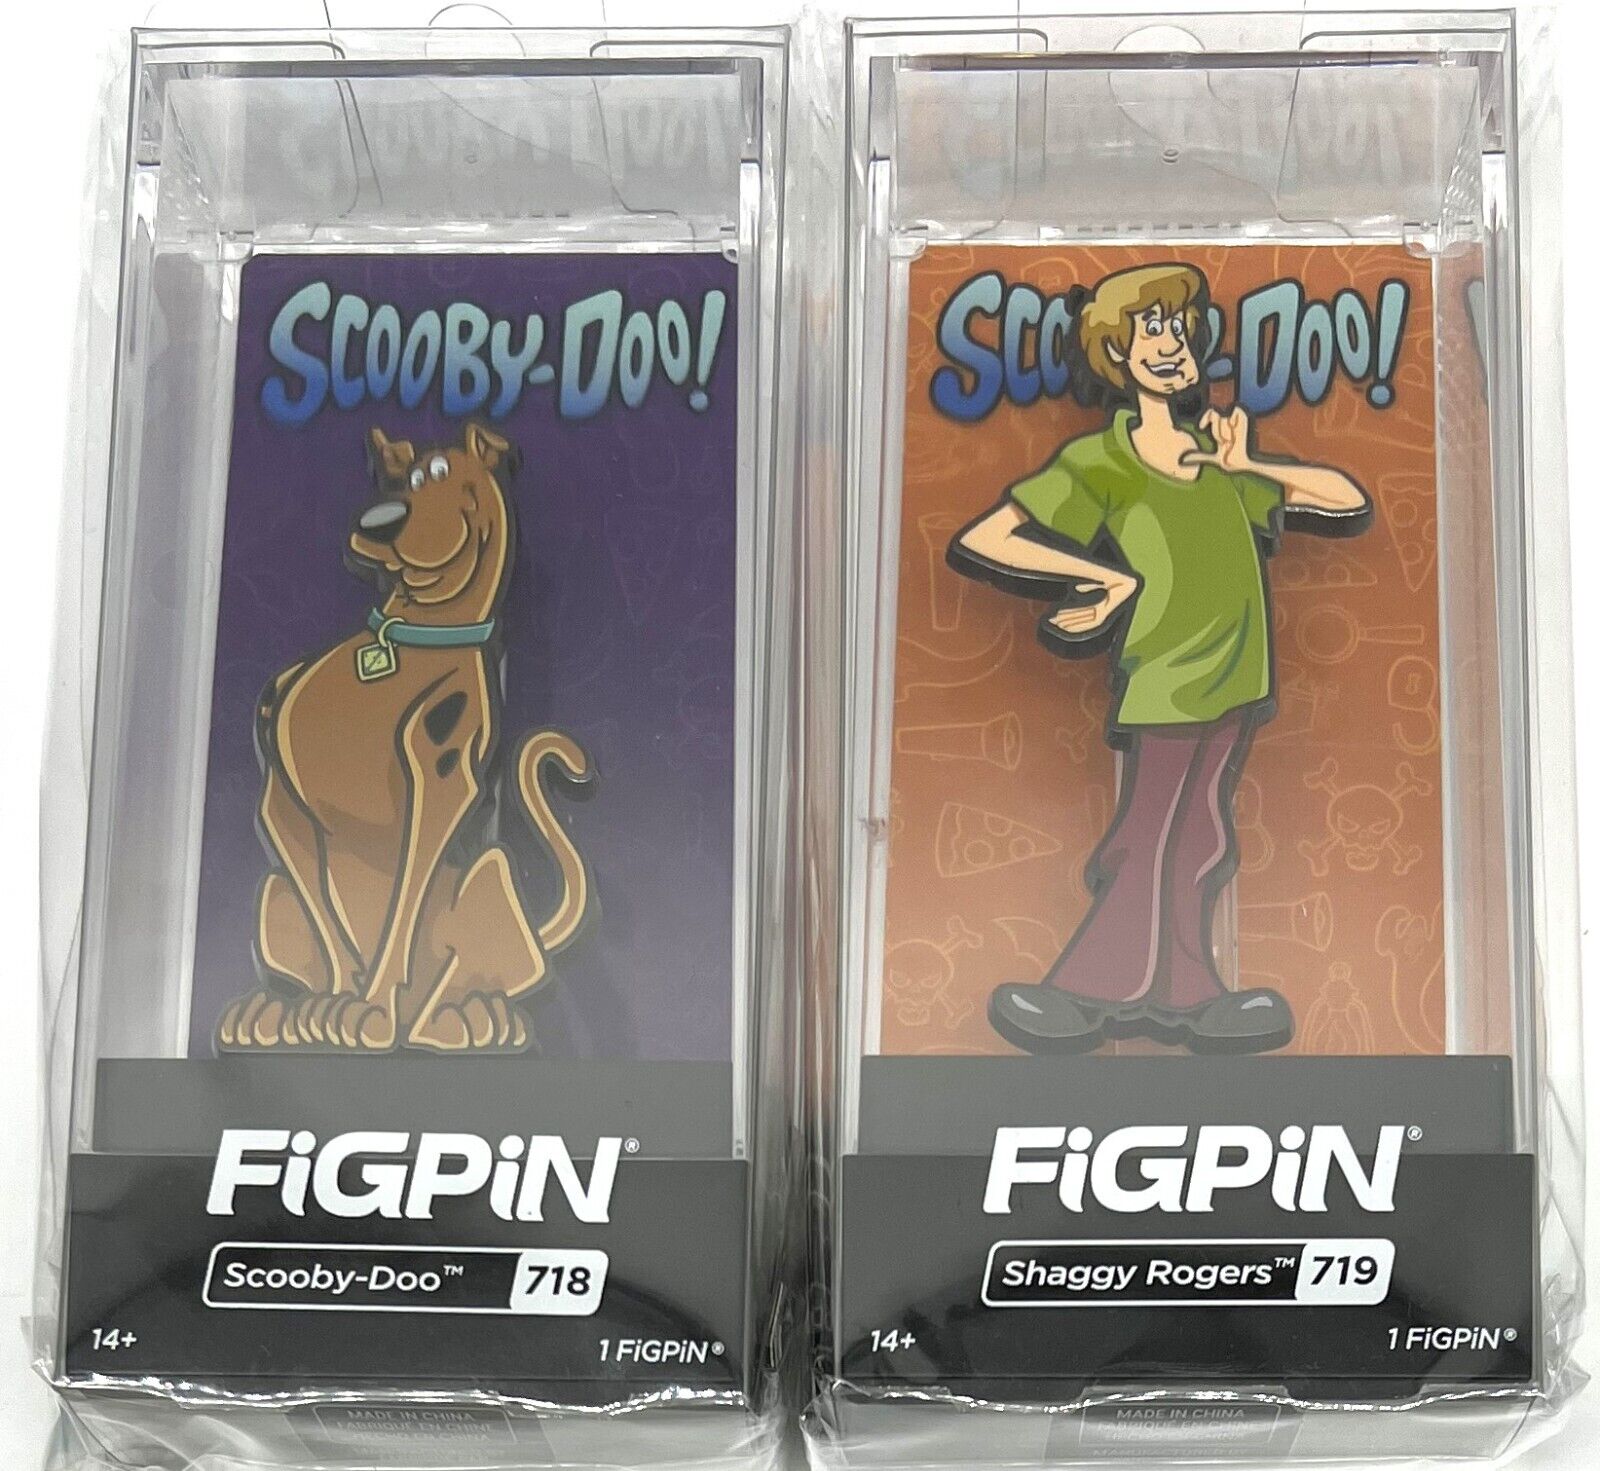 FiGPiN Scooby-Doo Shaggy Rogers #719 & Scooby-Doo #718 Pins Set of 2